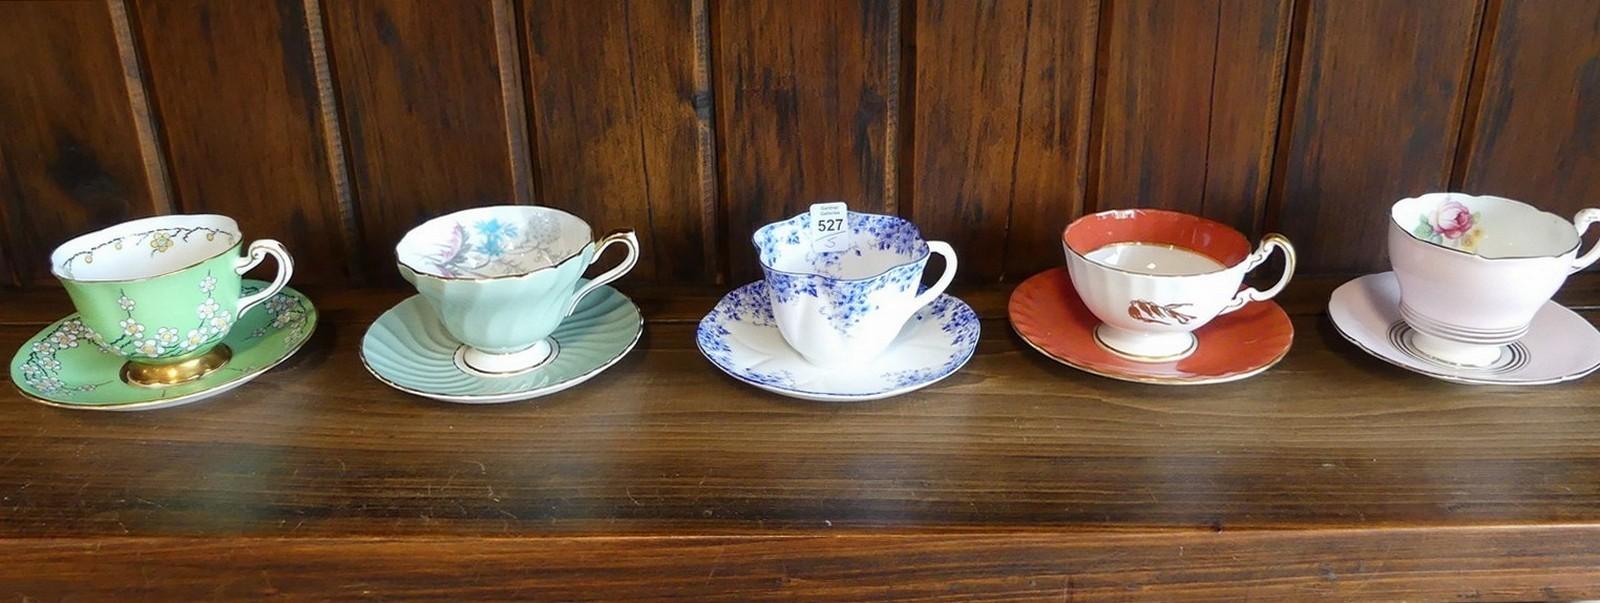 FIVE CUPS AND SAUCERS